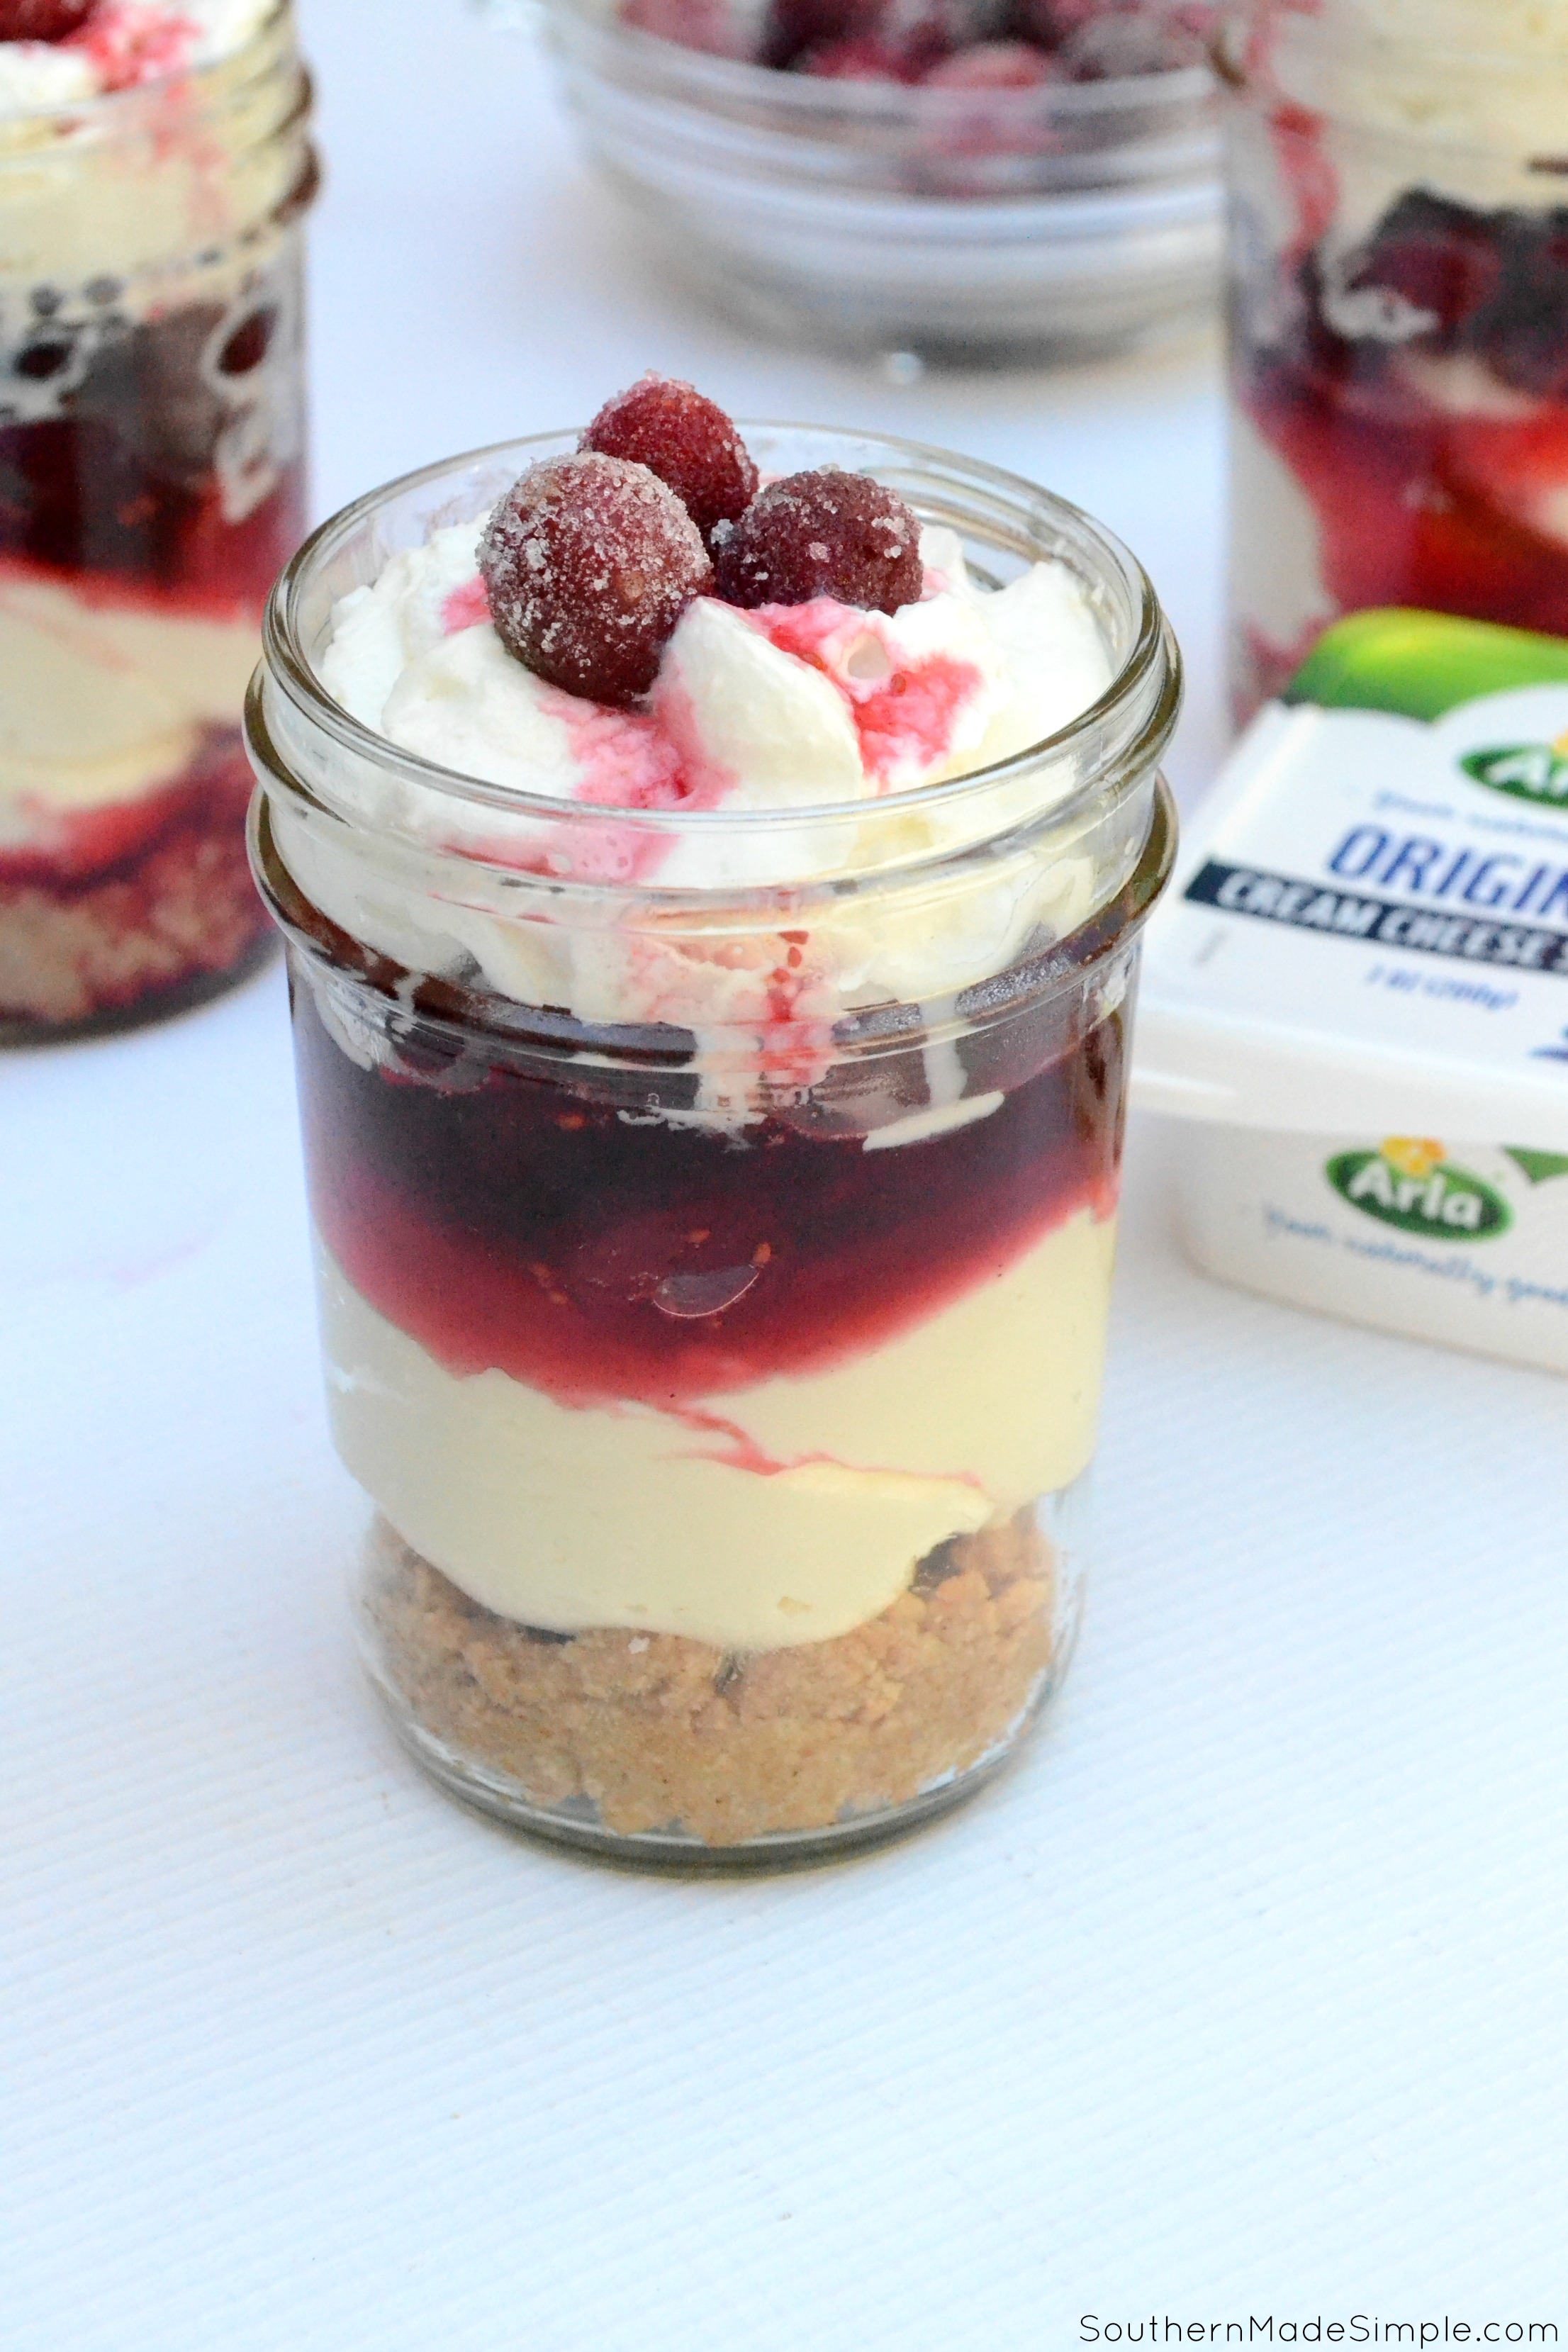 #Ad If you're looking for a sweet treat to whip up for friends and famiy, these No Bake Mini Cranberry Cheesecake Trifles are hard to beat! The sweet and creamy filling paired with the tartness of the cranberries makes for a decadent dessert that'll quickly become a favorite!